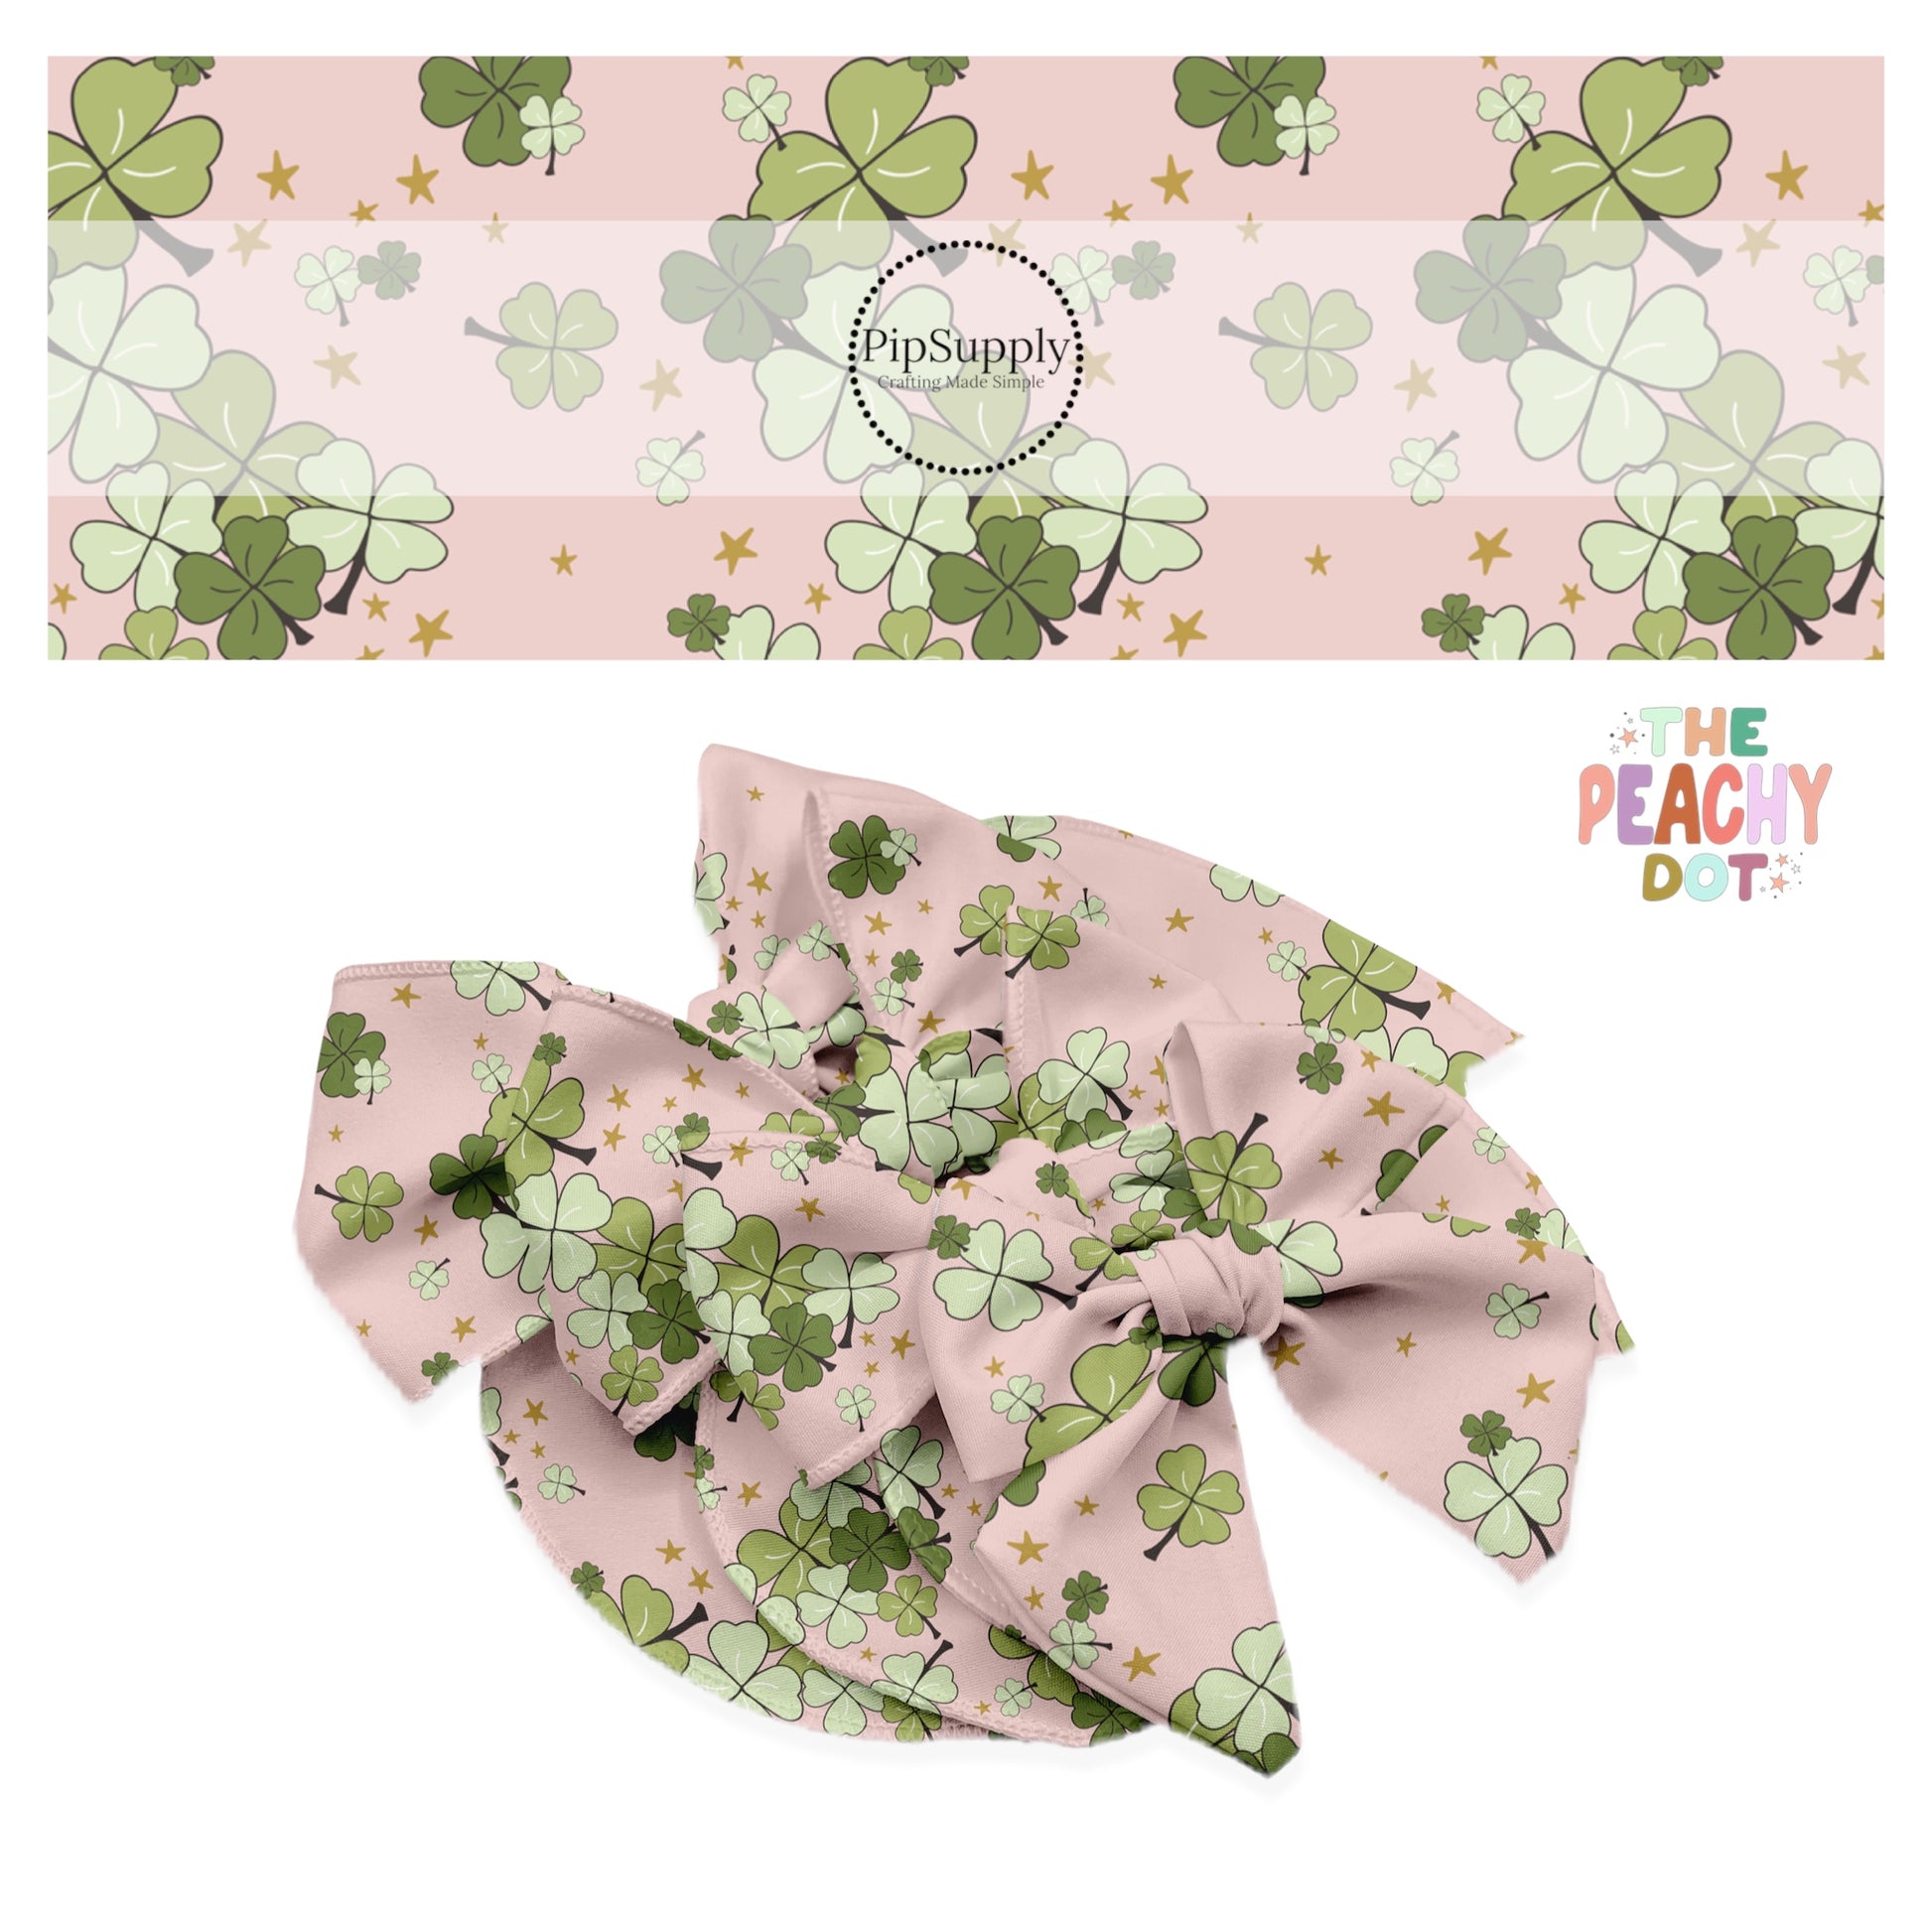 4 leaf clovers that are different shades of green with gold stars on a light pink bow strip